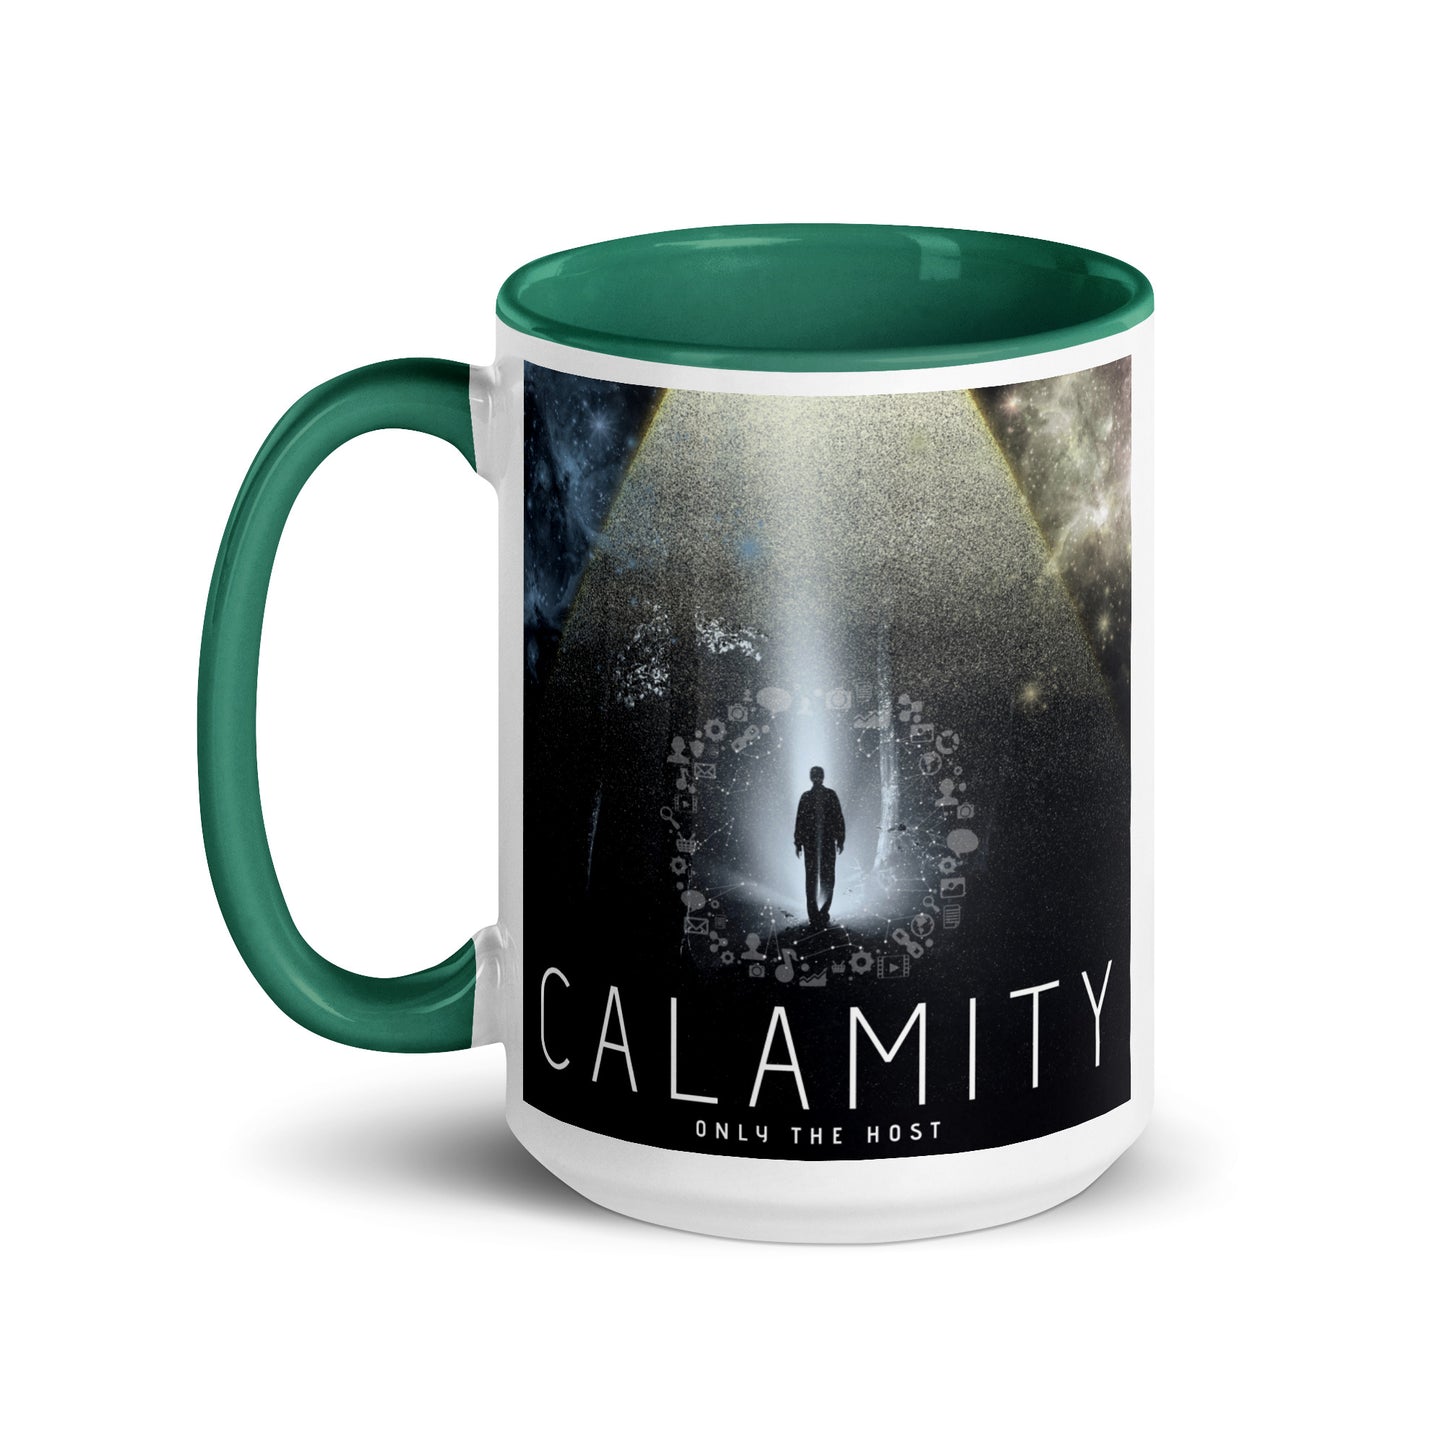 Only The Host - Calamity Mug With Color Inside